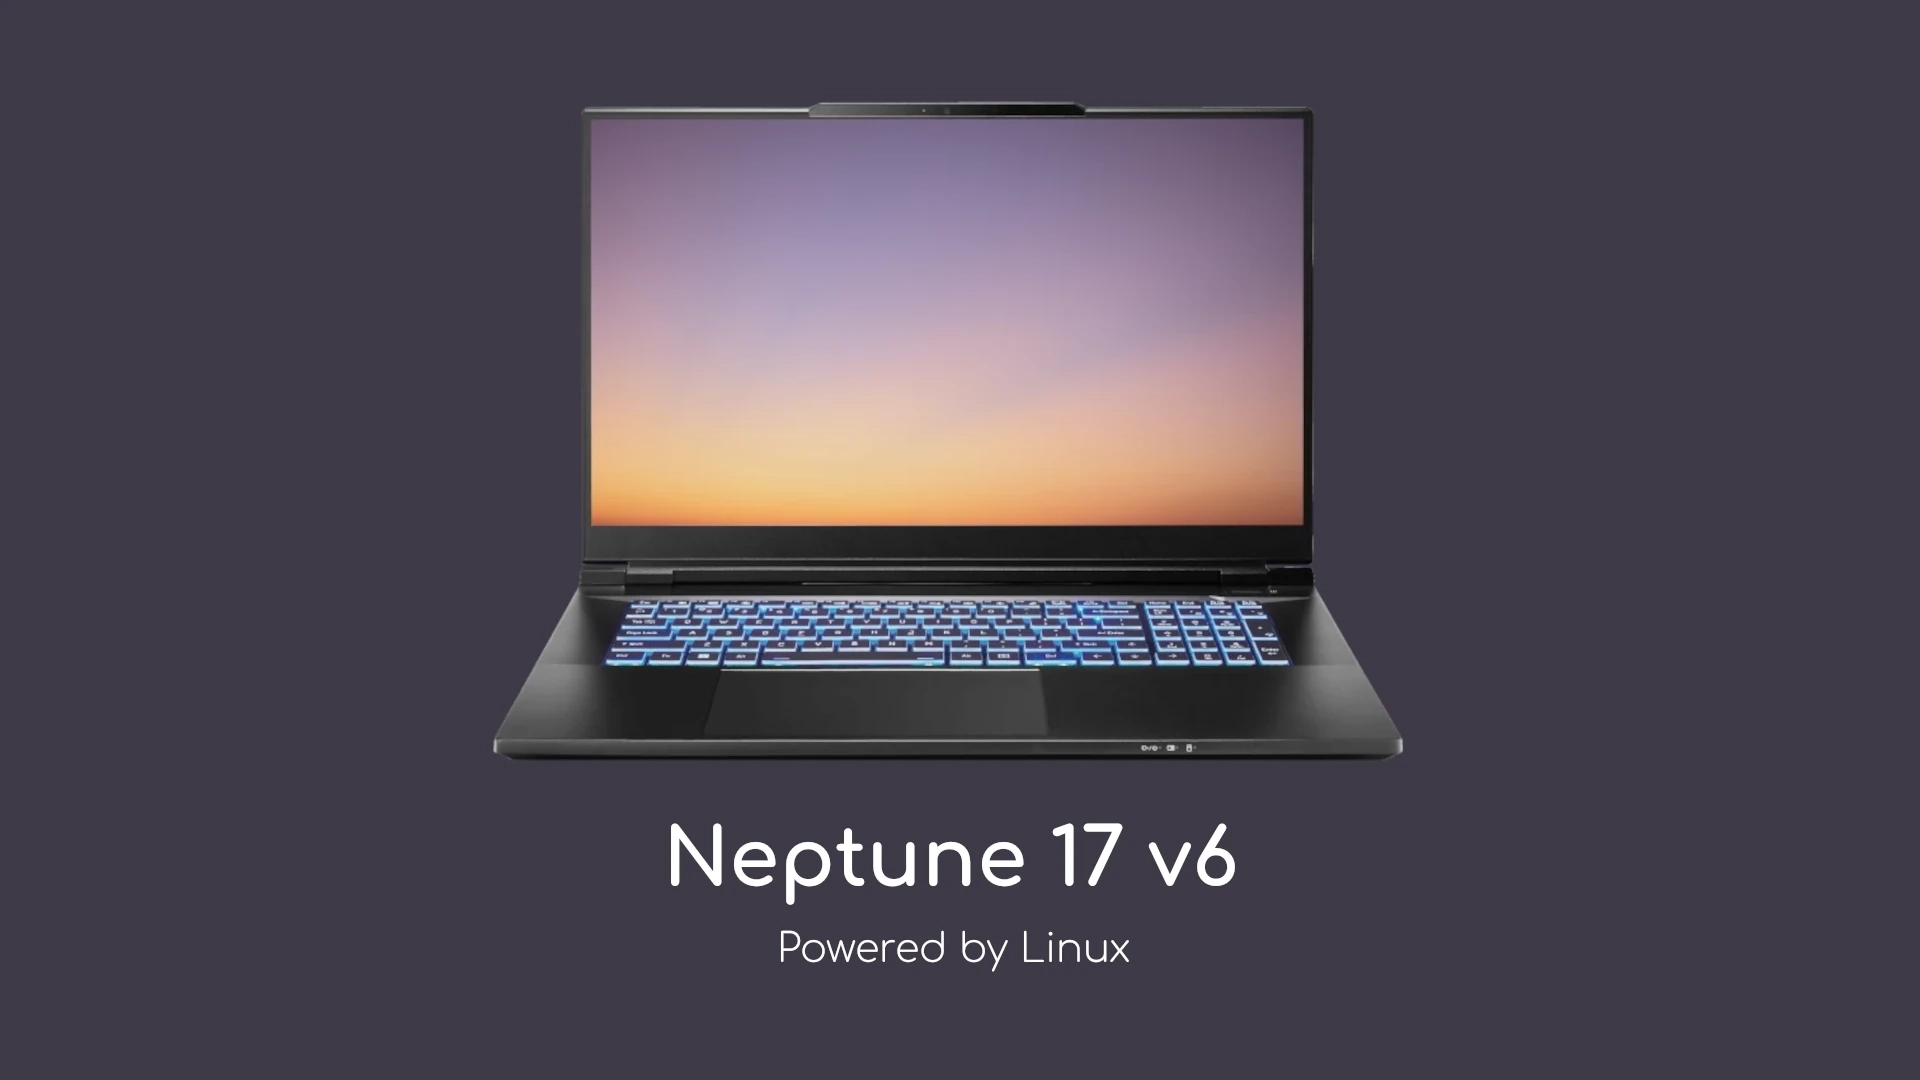 Introducing Juno Computers’ Neptune 17 v6: A Powerful Linux Laptop With Up To NVIDIA RTX 4090